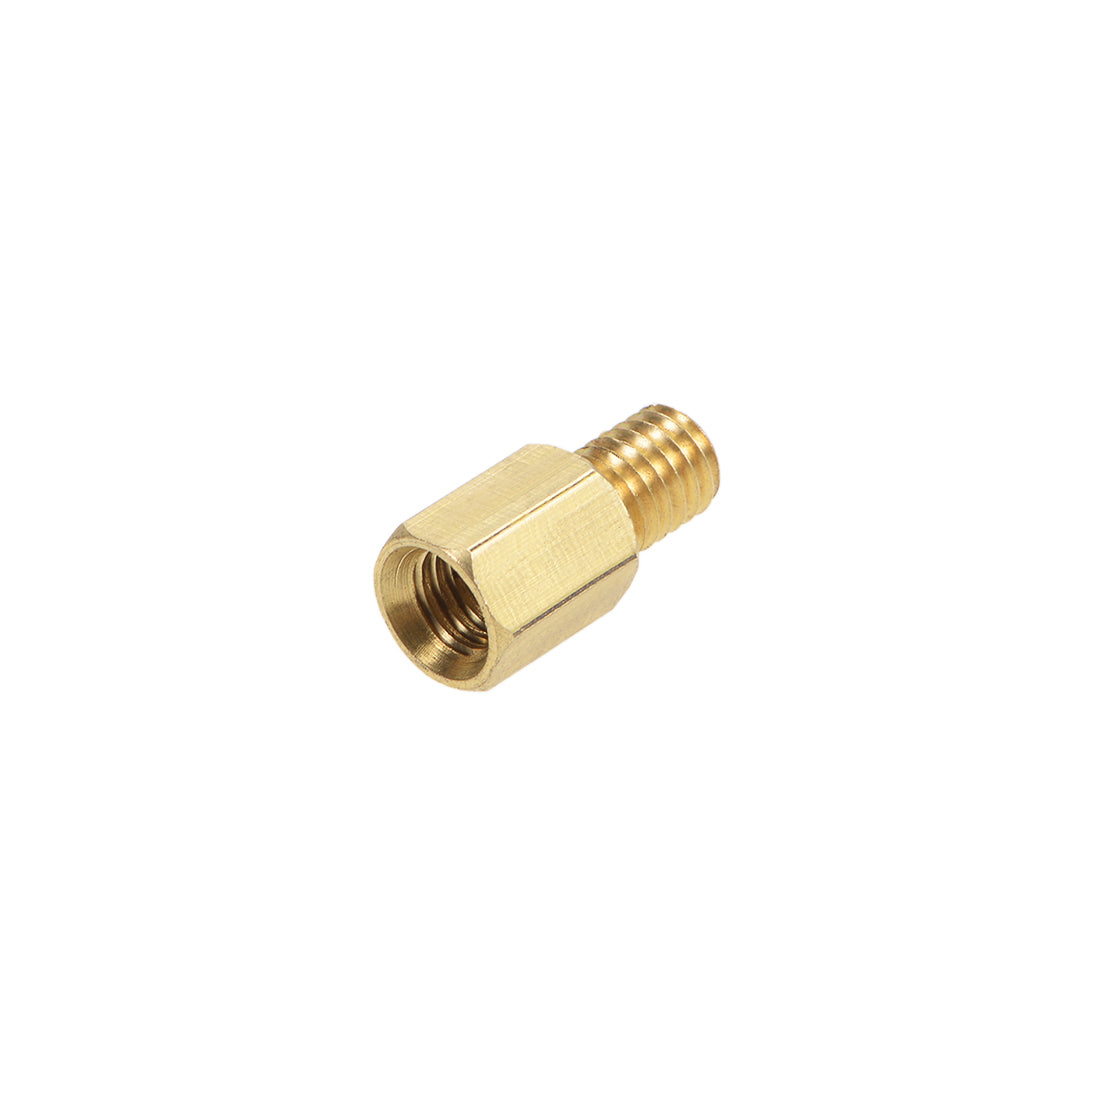 Uxcell Uxcell M6 x 35 mm + 8 mm Male to Female Hex Brass Spacer Standoff 5pcs